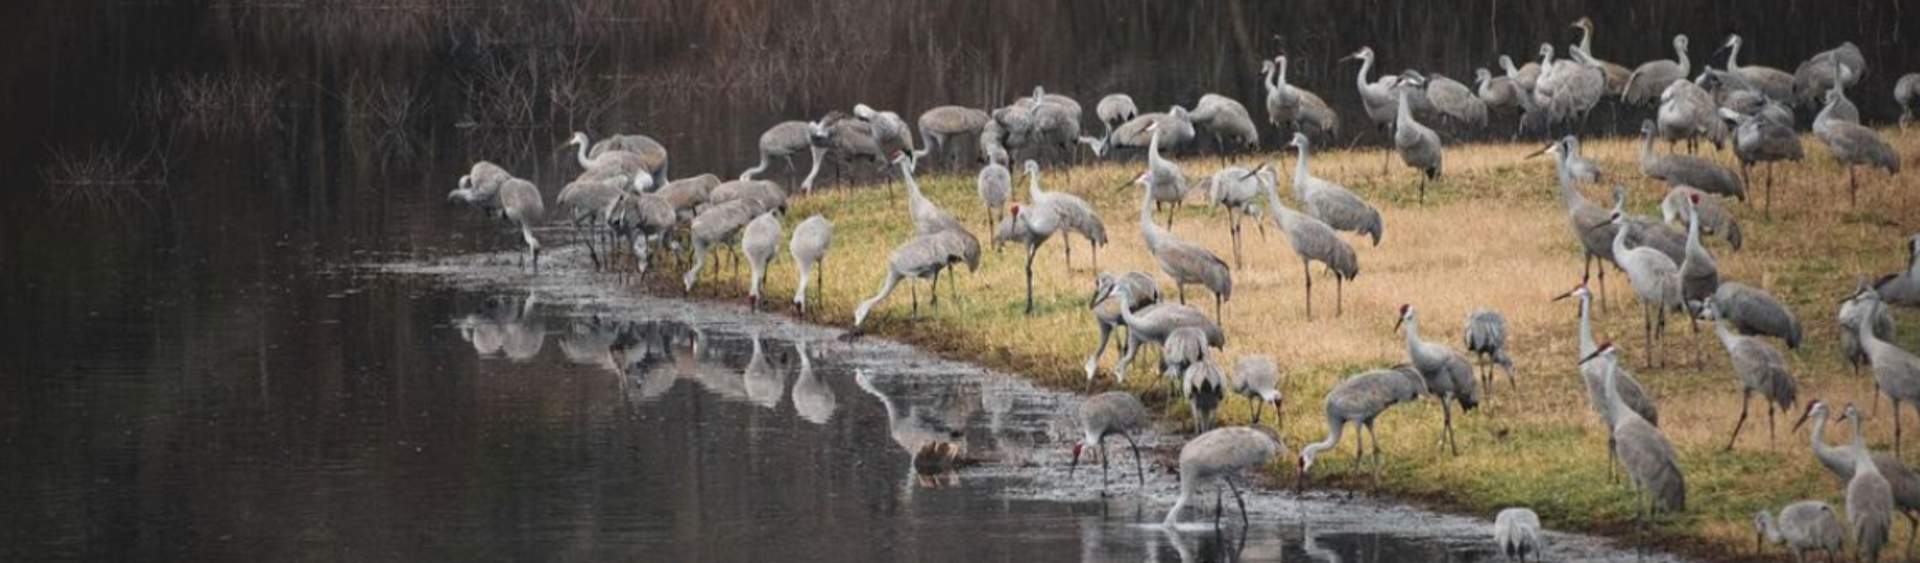 Come see sandhill cranes in the wild at DWR events this fall